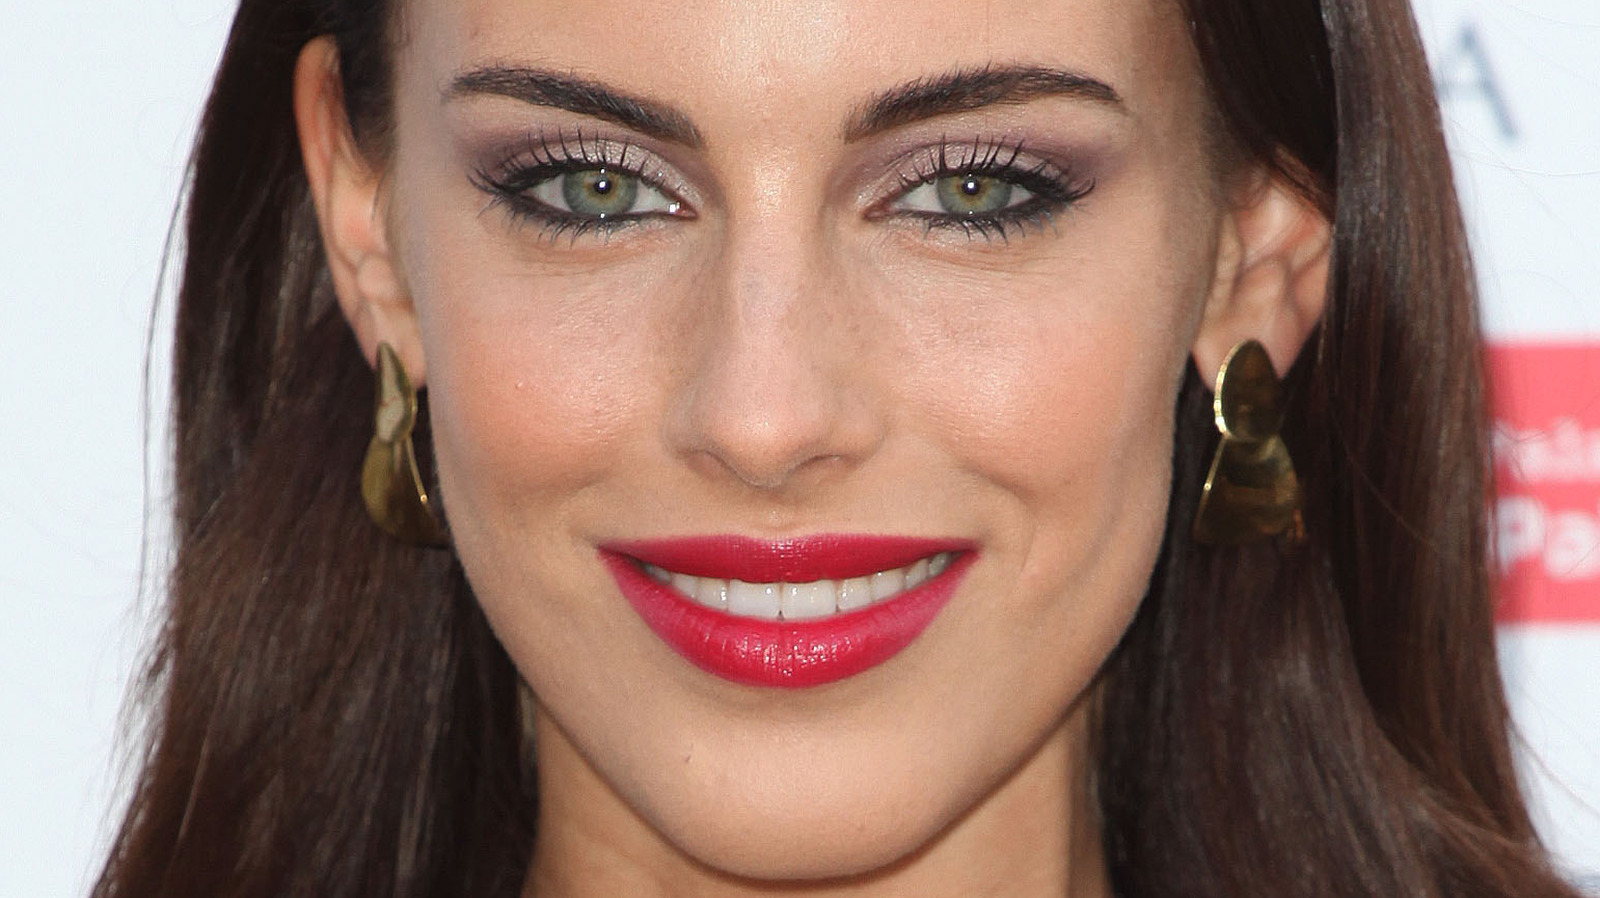 The Reason Why Jessica Lowndes Will Not Be On The Hallmark Channel Anymore